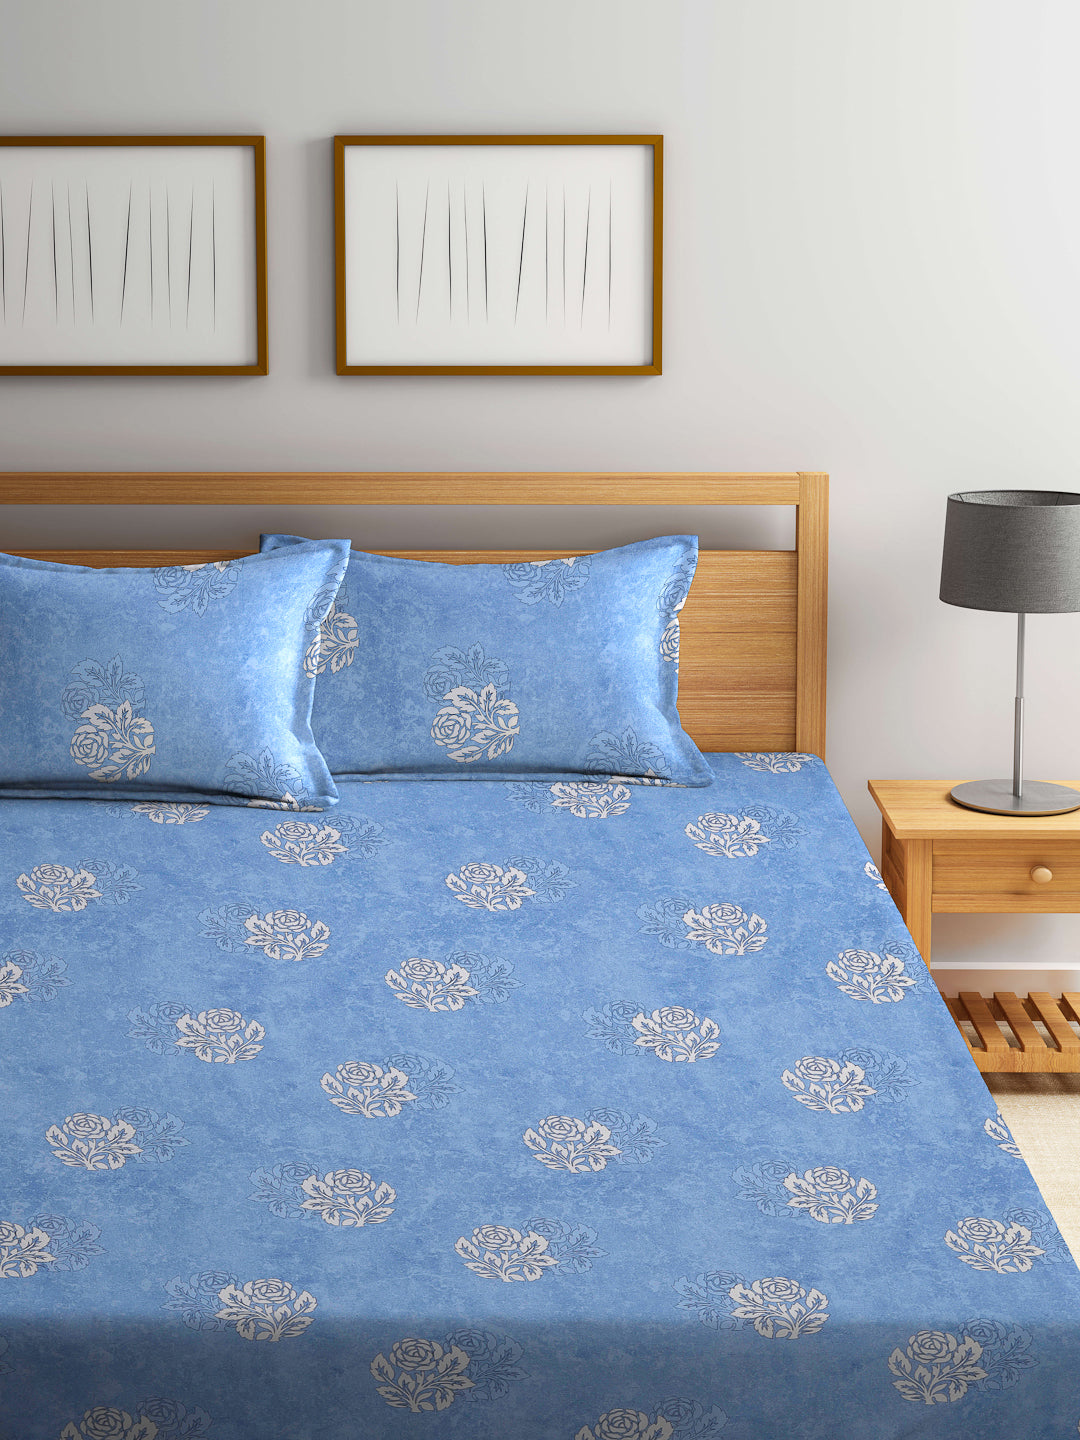 Klotthe Blue Floral 400 TC Pure Cotton Double Bedsheet Set in Book Fold Packing